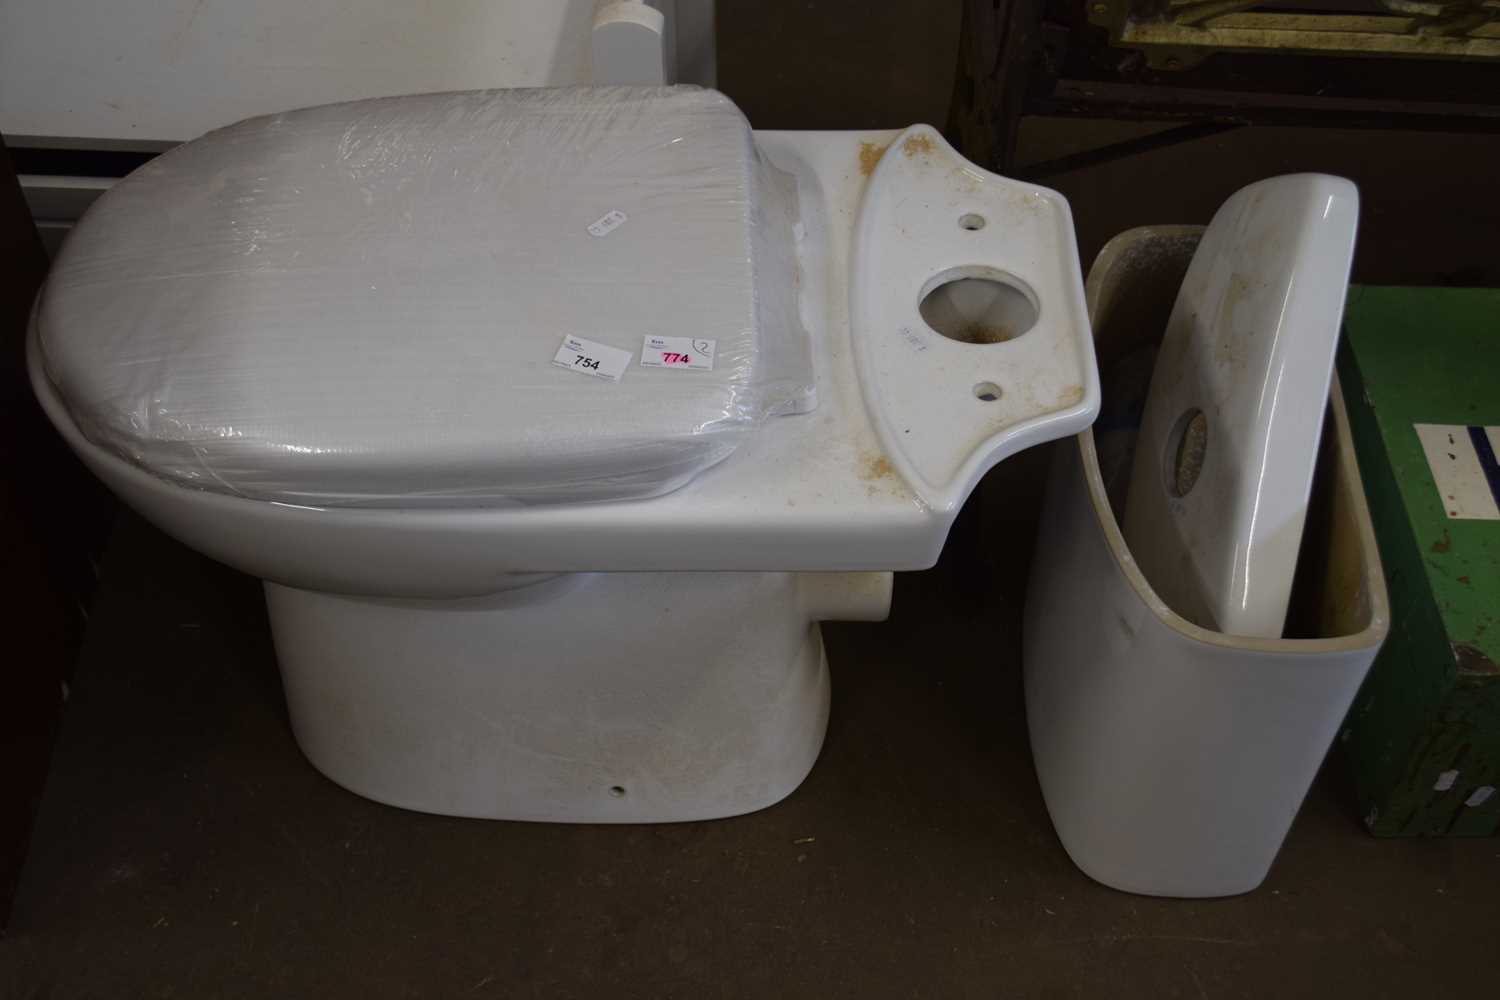 Ceramic toilet and cistern